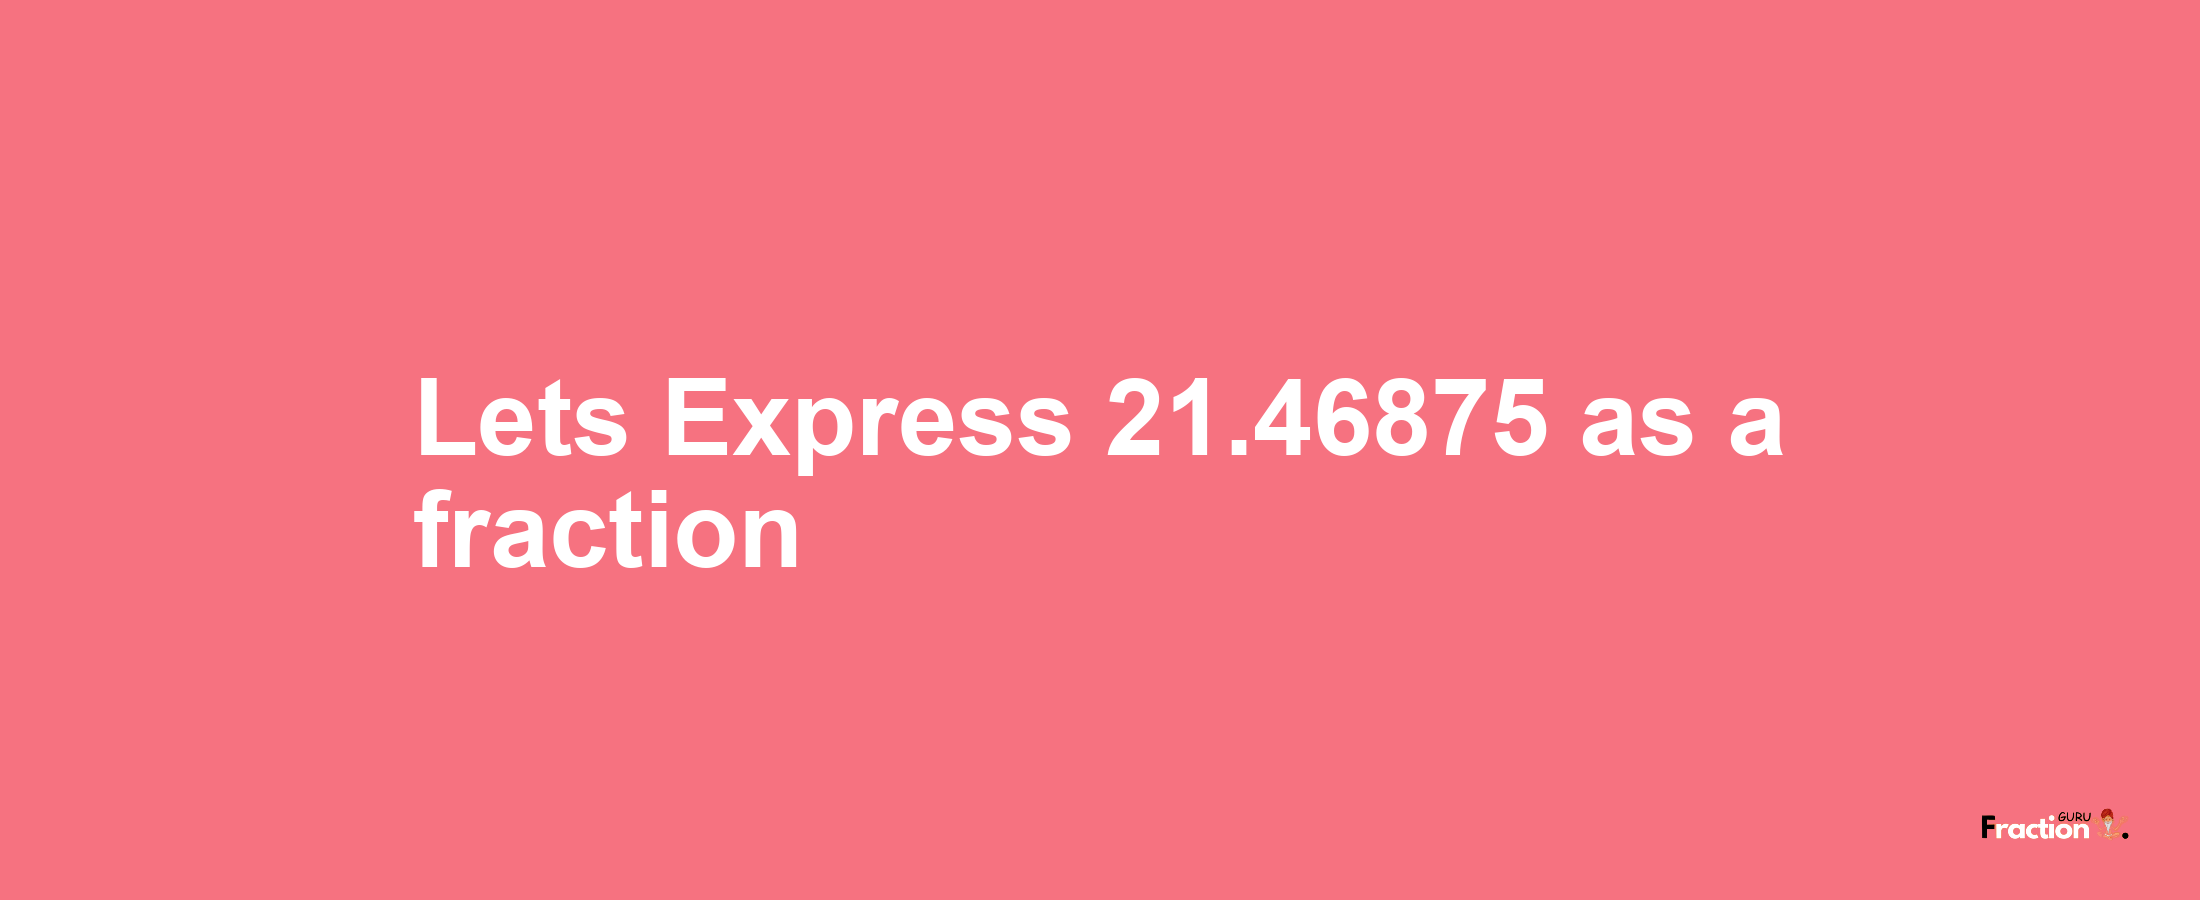 Lets Express 21.46875 as afraction